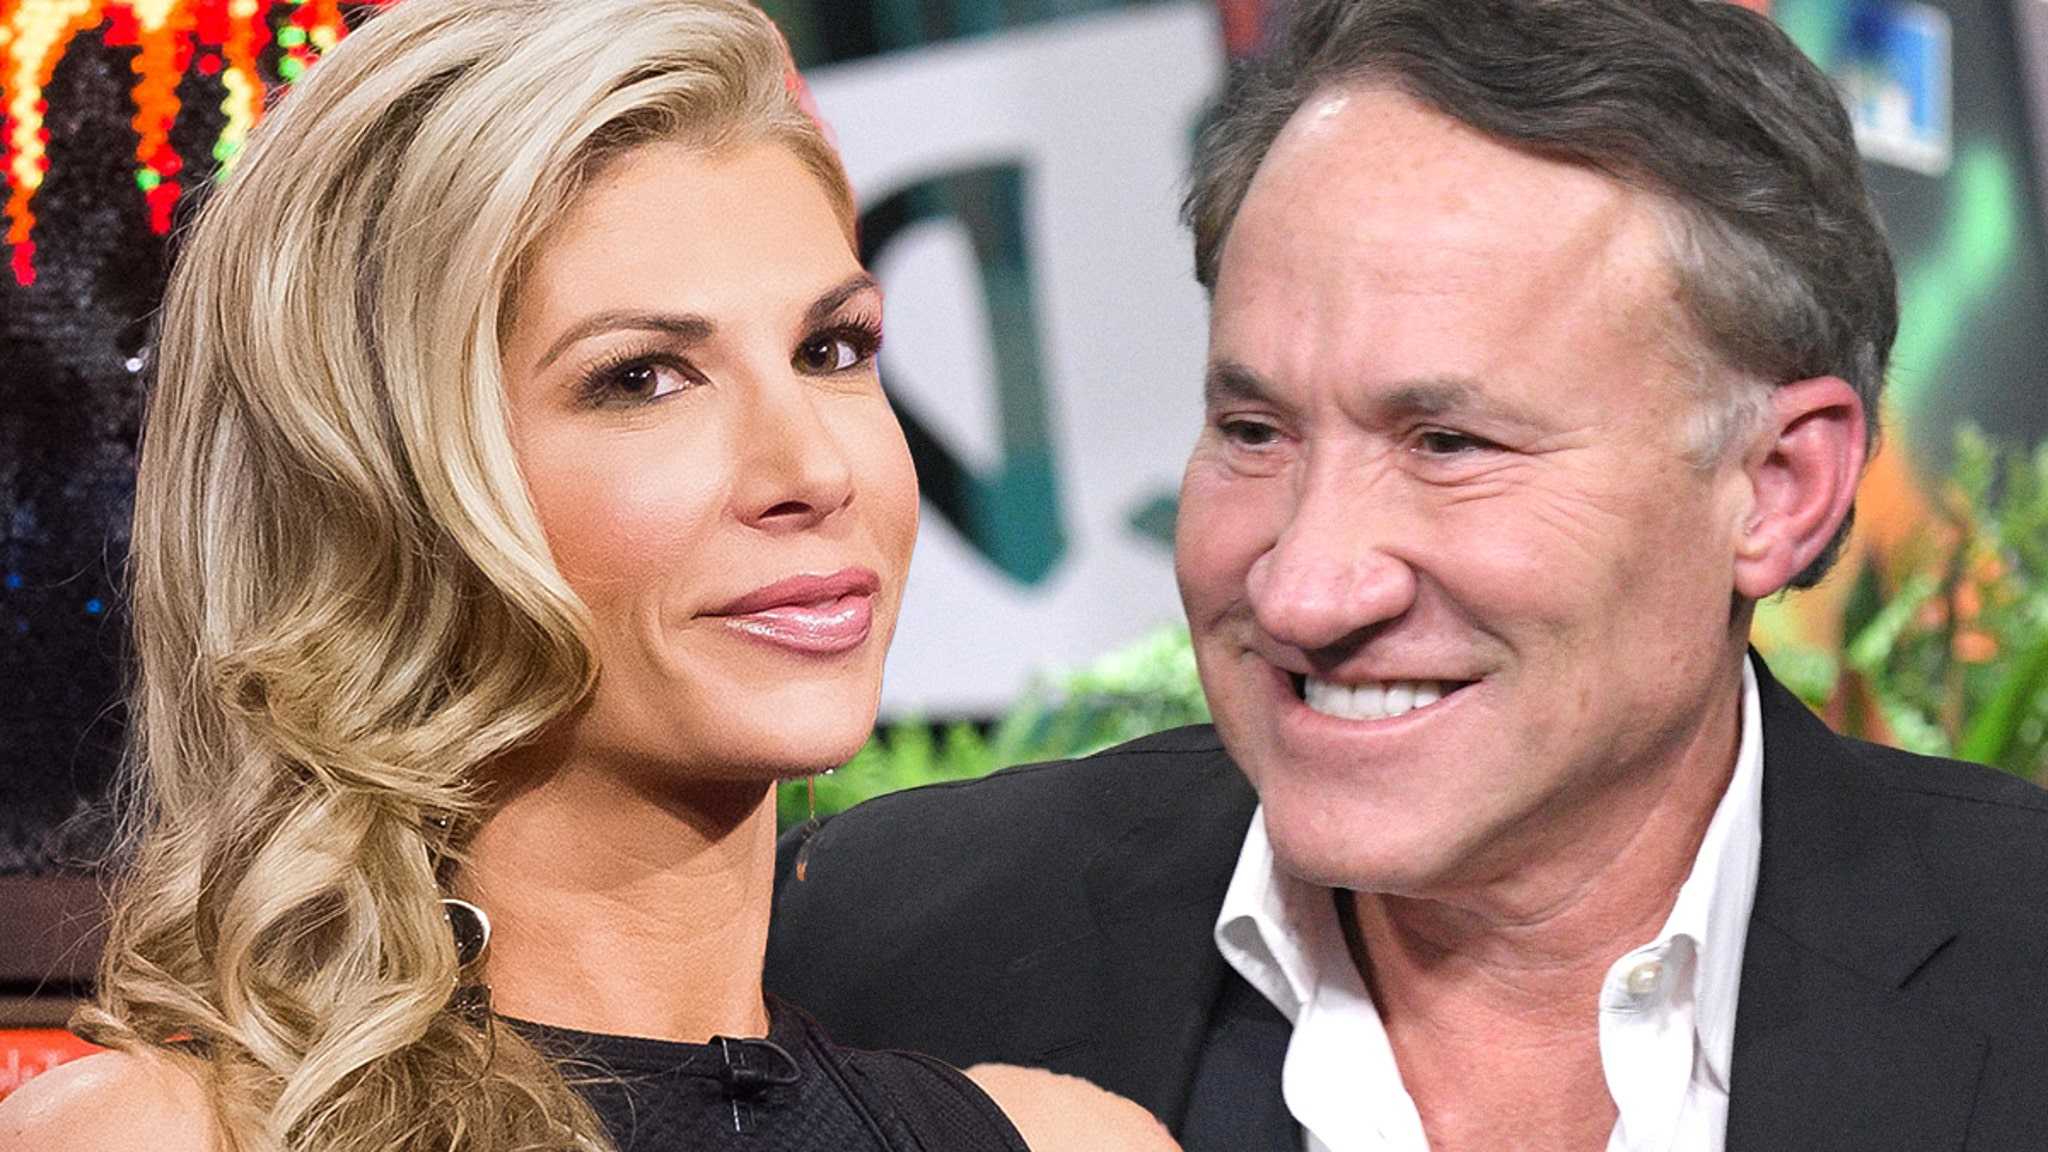 'RHOC' Alexis Bellino's Ear Infected By Piercing, Dr. Terry Dubrow Helps Out